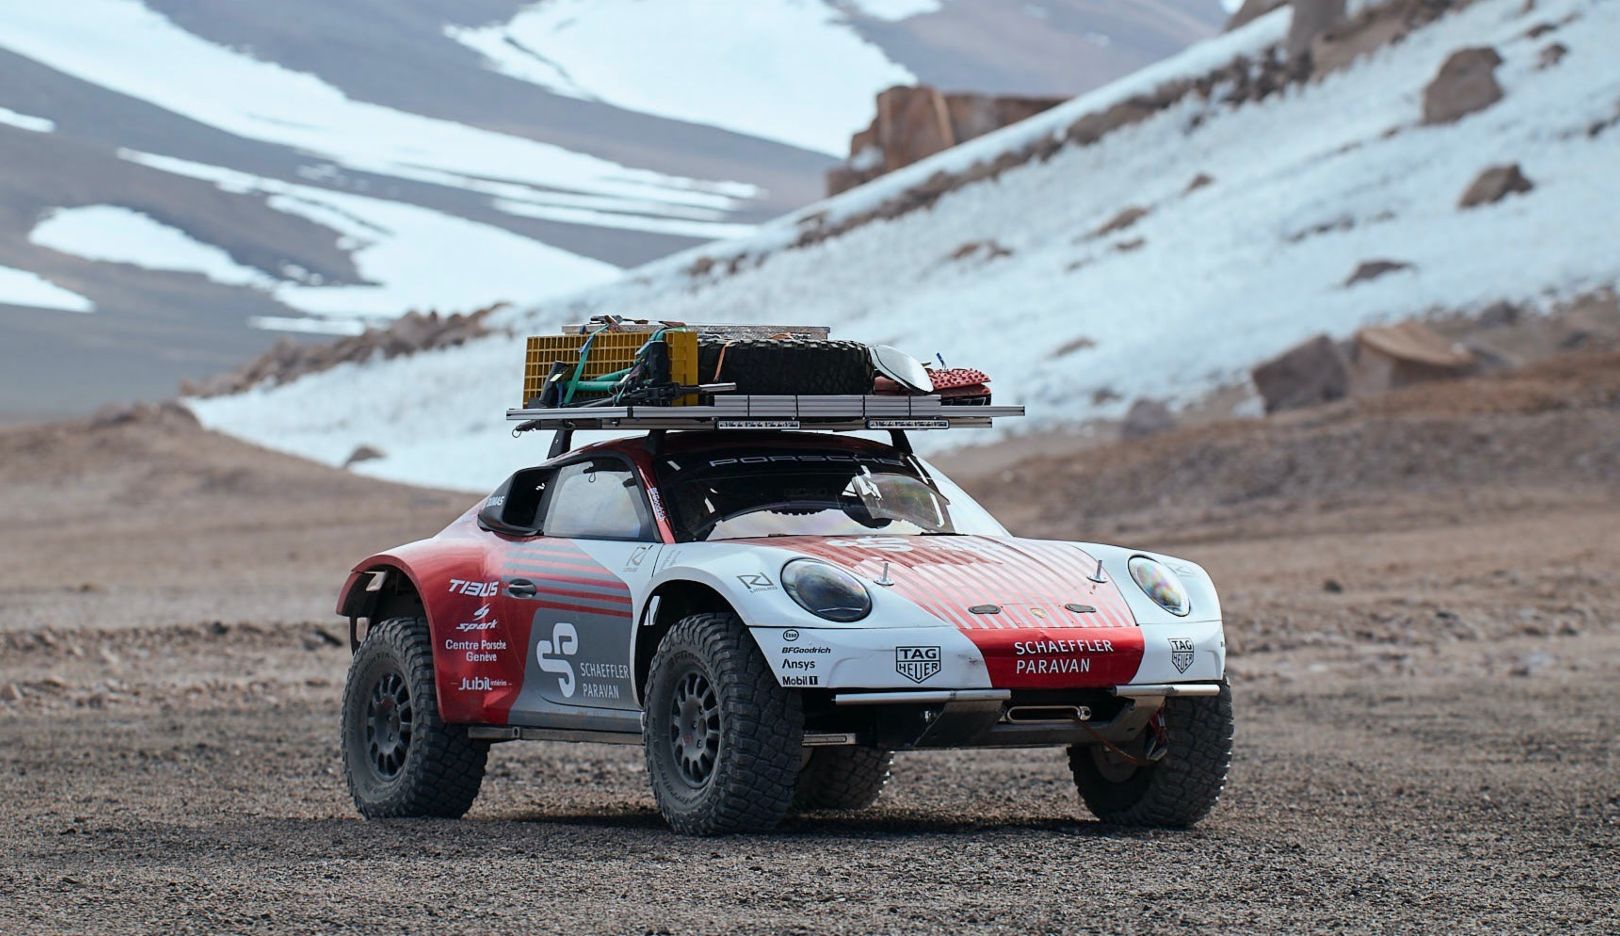 The 911 proved its expeditionary pedigree on the trip to the summit.